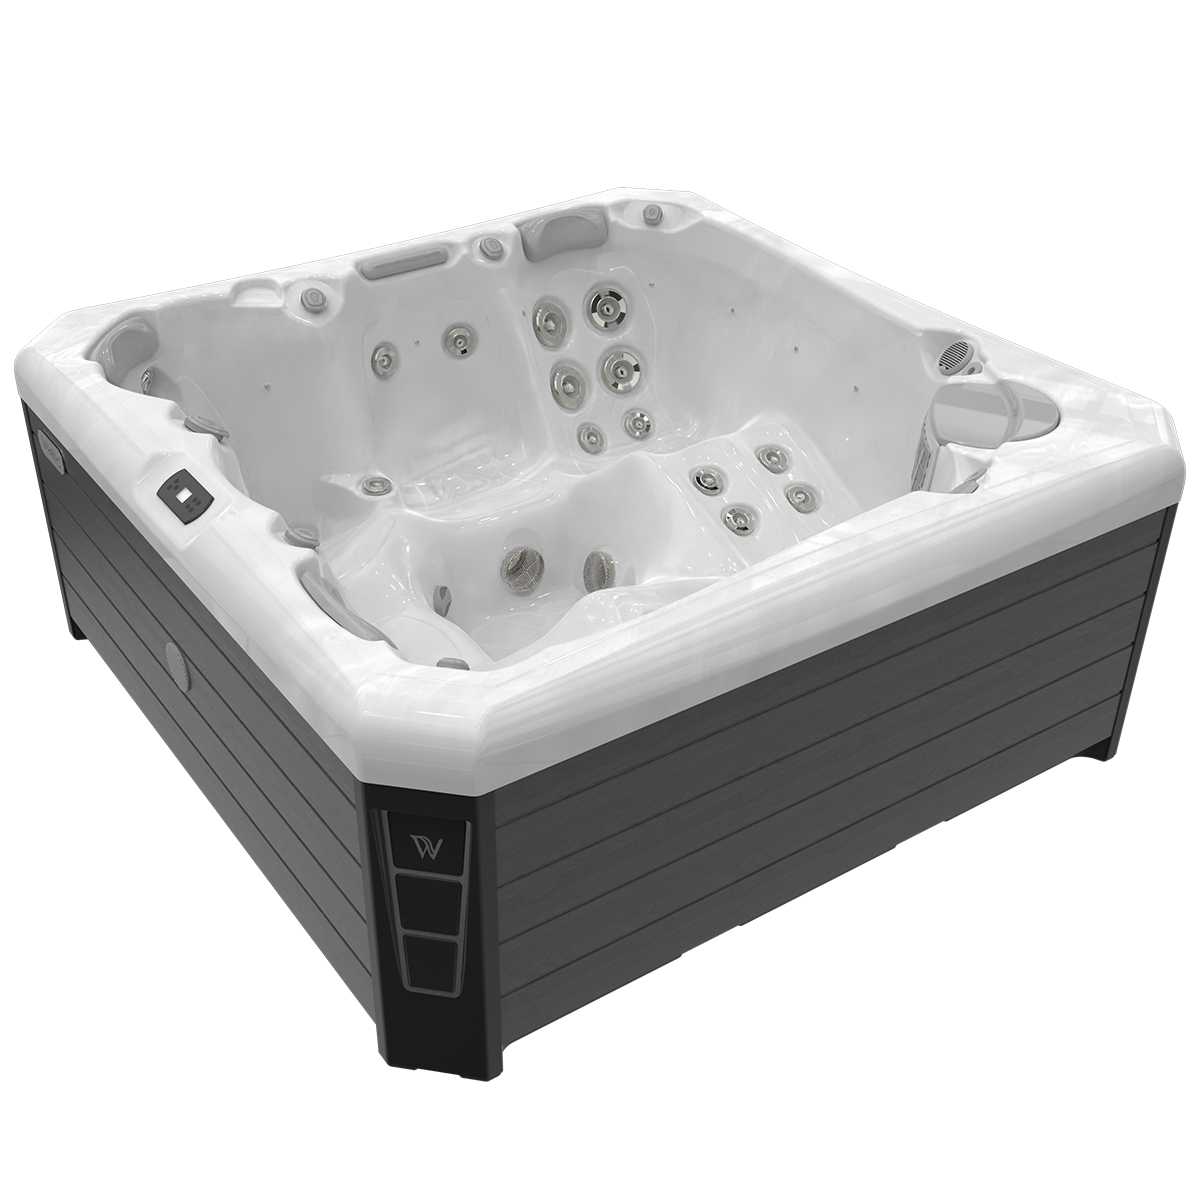 Wellis Palermo Life hot tub sterling silver